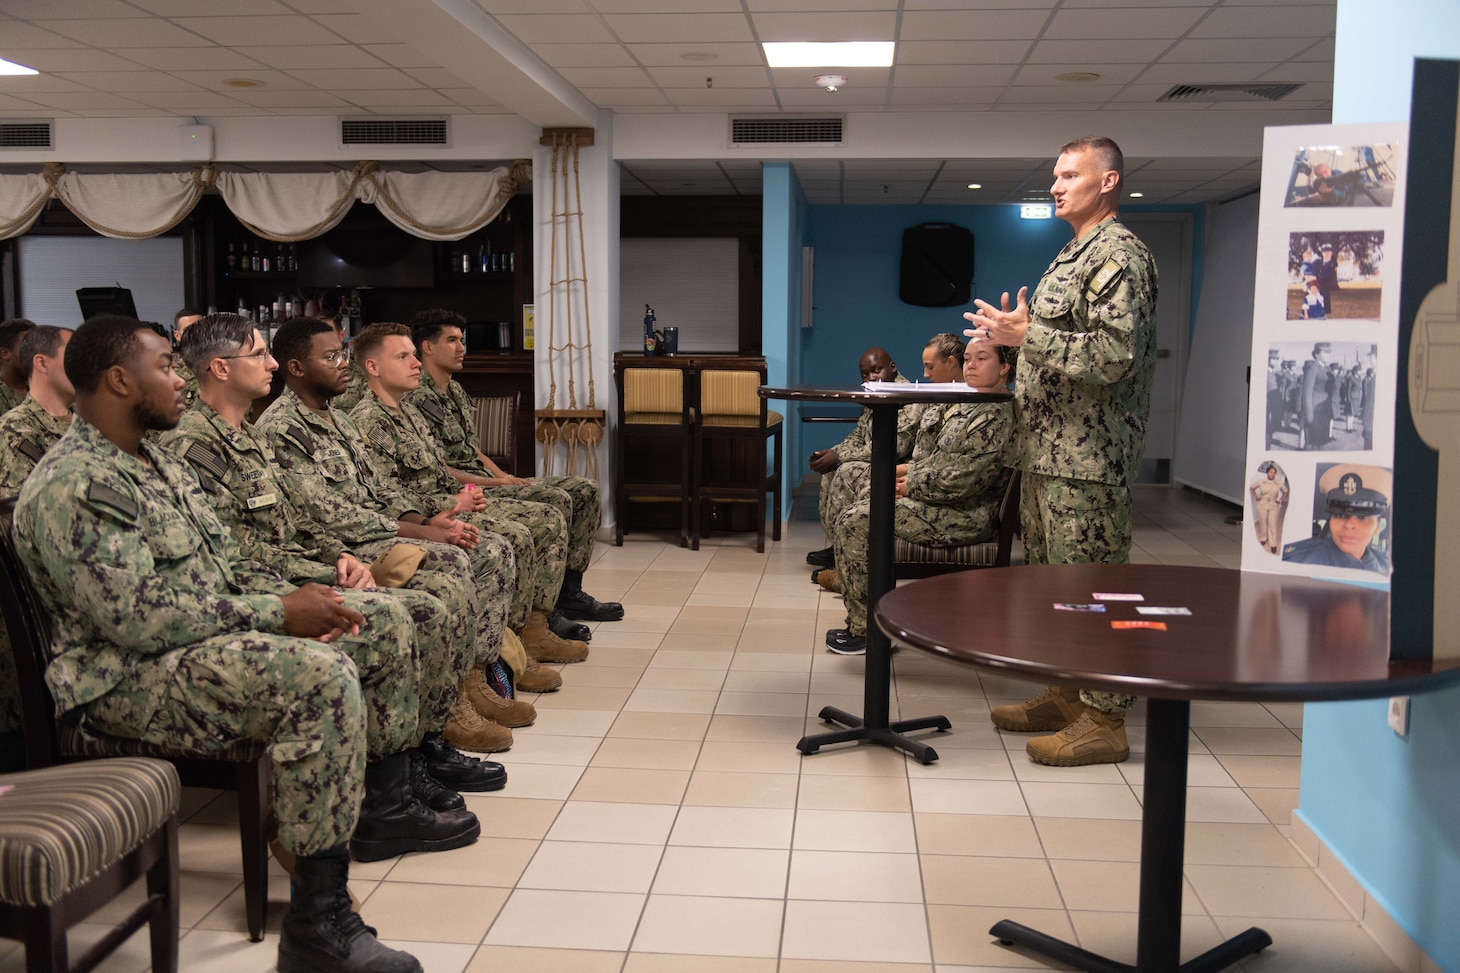 Capt. Odin J. Klug, commanding officer, Naval Support Activity (NSA) Souda Bay, discusses the historic contributions of women to the U.S. military during a commemoration of the 75th anniversary of the Women’s Armed Services Integration Act on June 12, 2023.